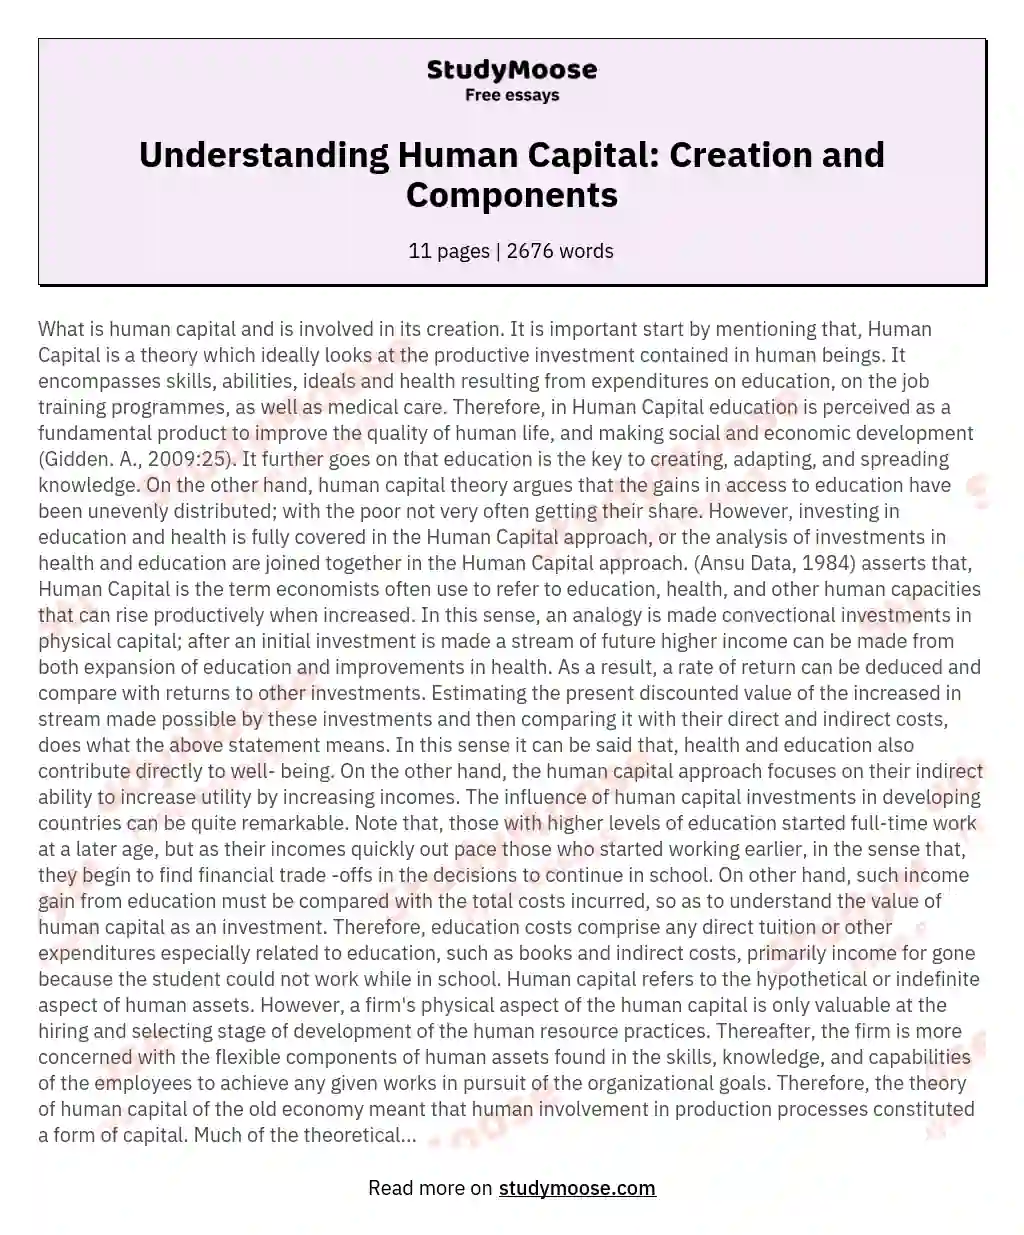 Understanding Human Capital: Creation and Components essay